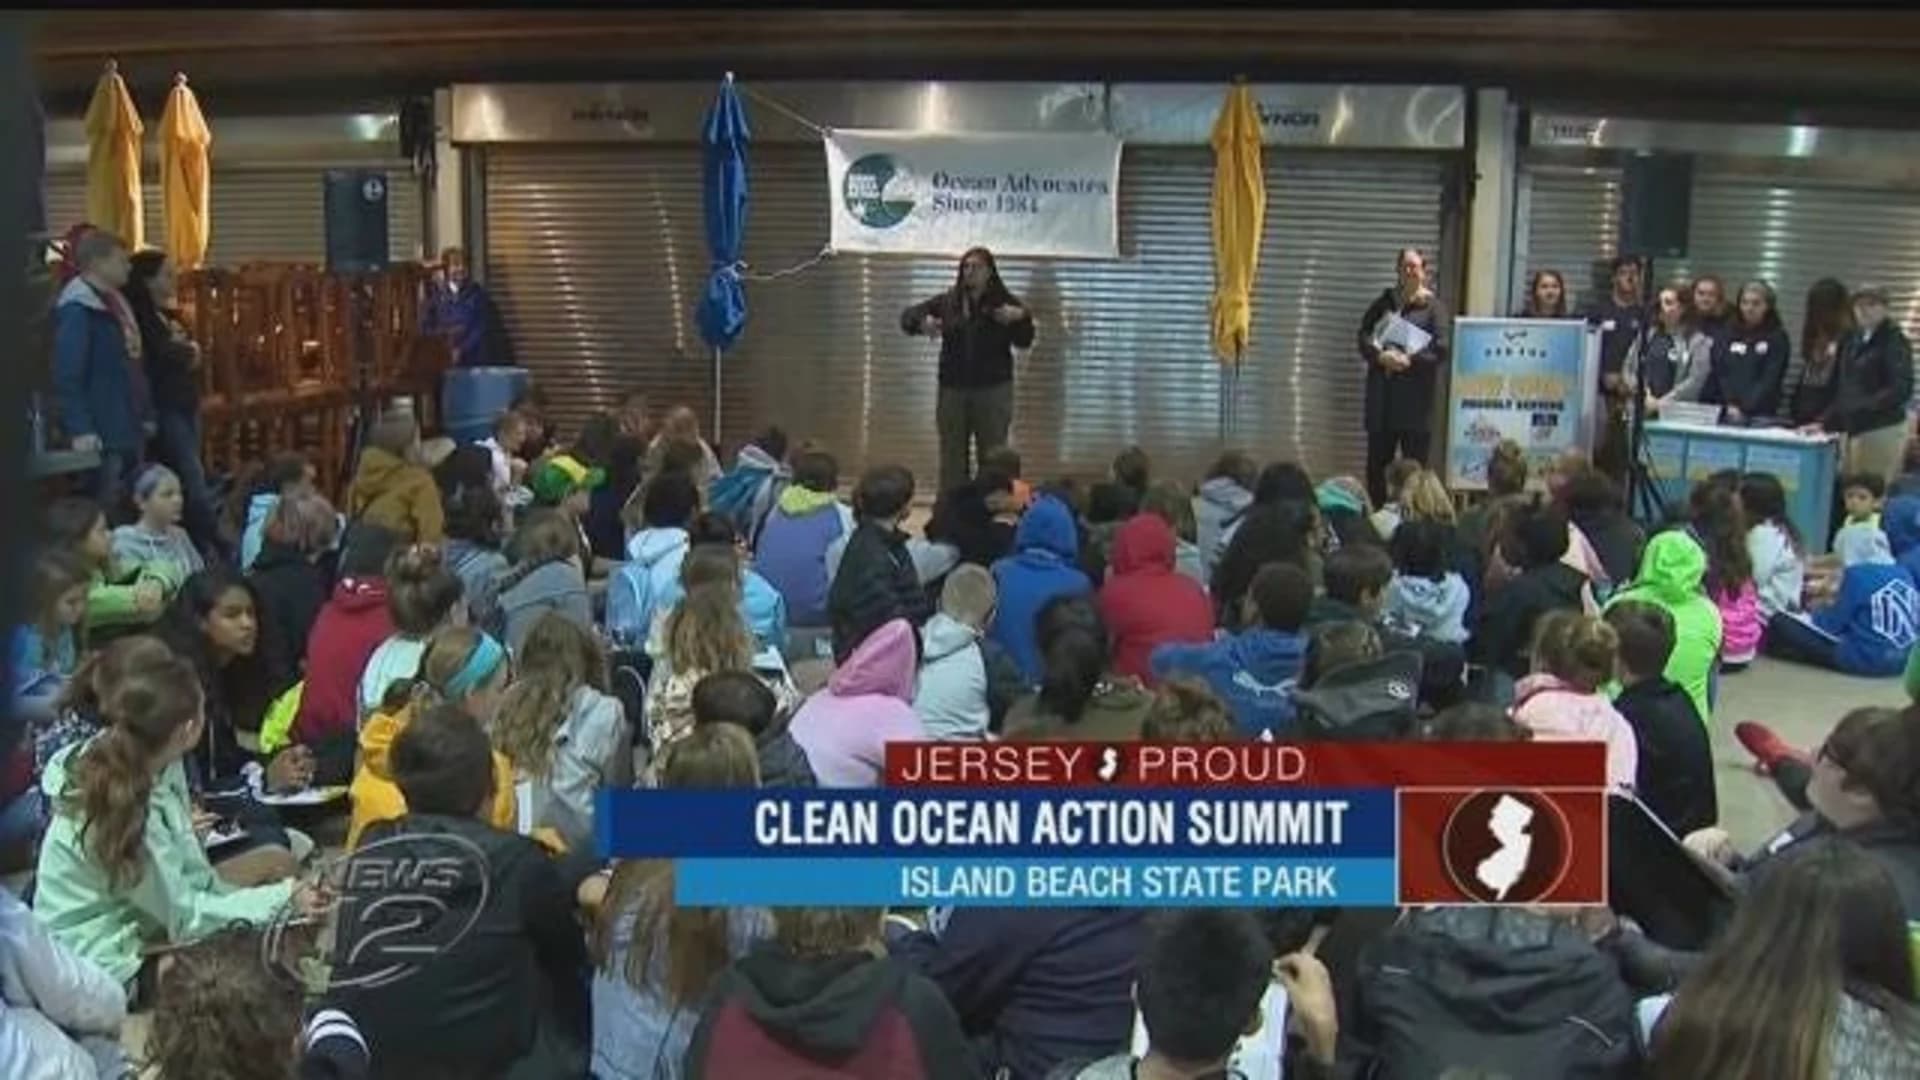 Jersey Proud: New Jersey students participate in beach cleanup